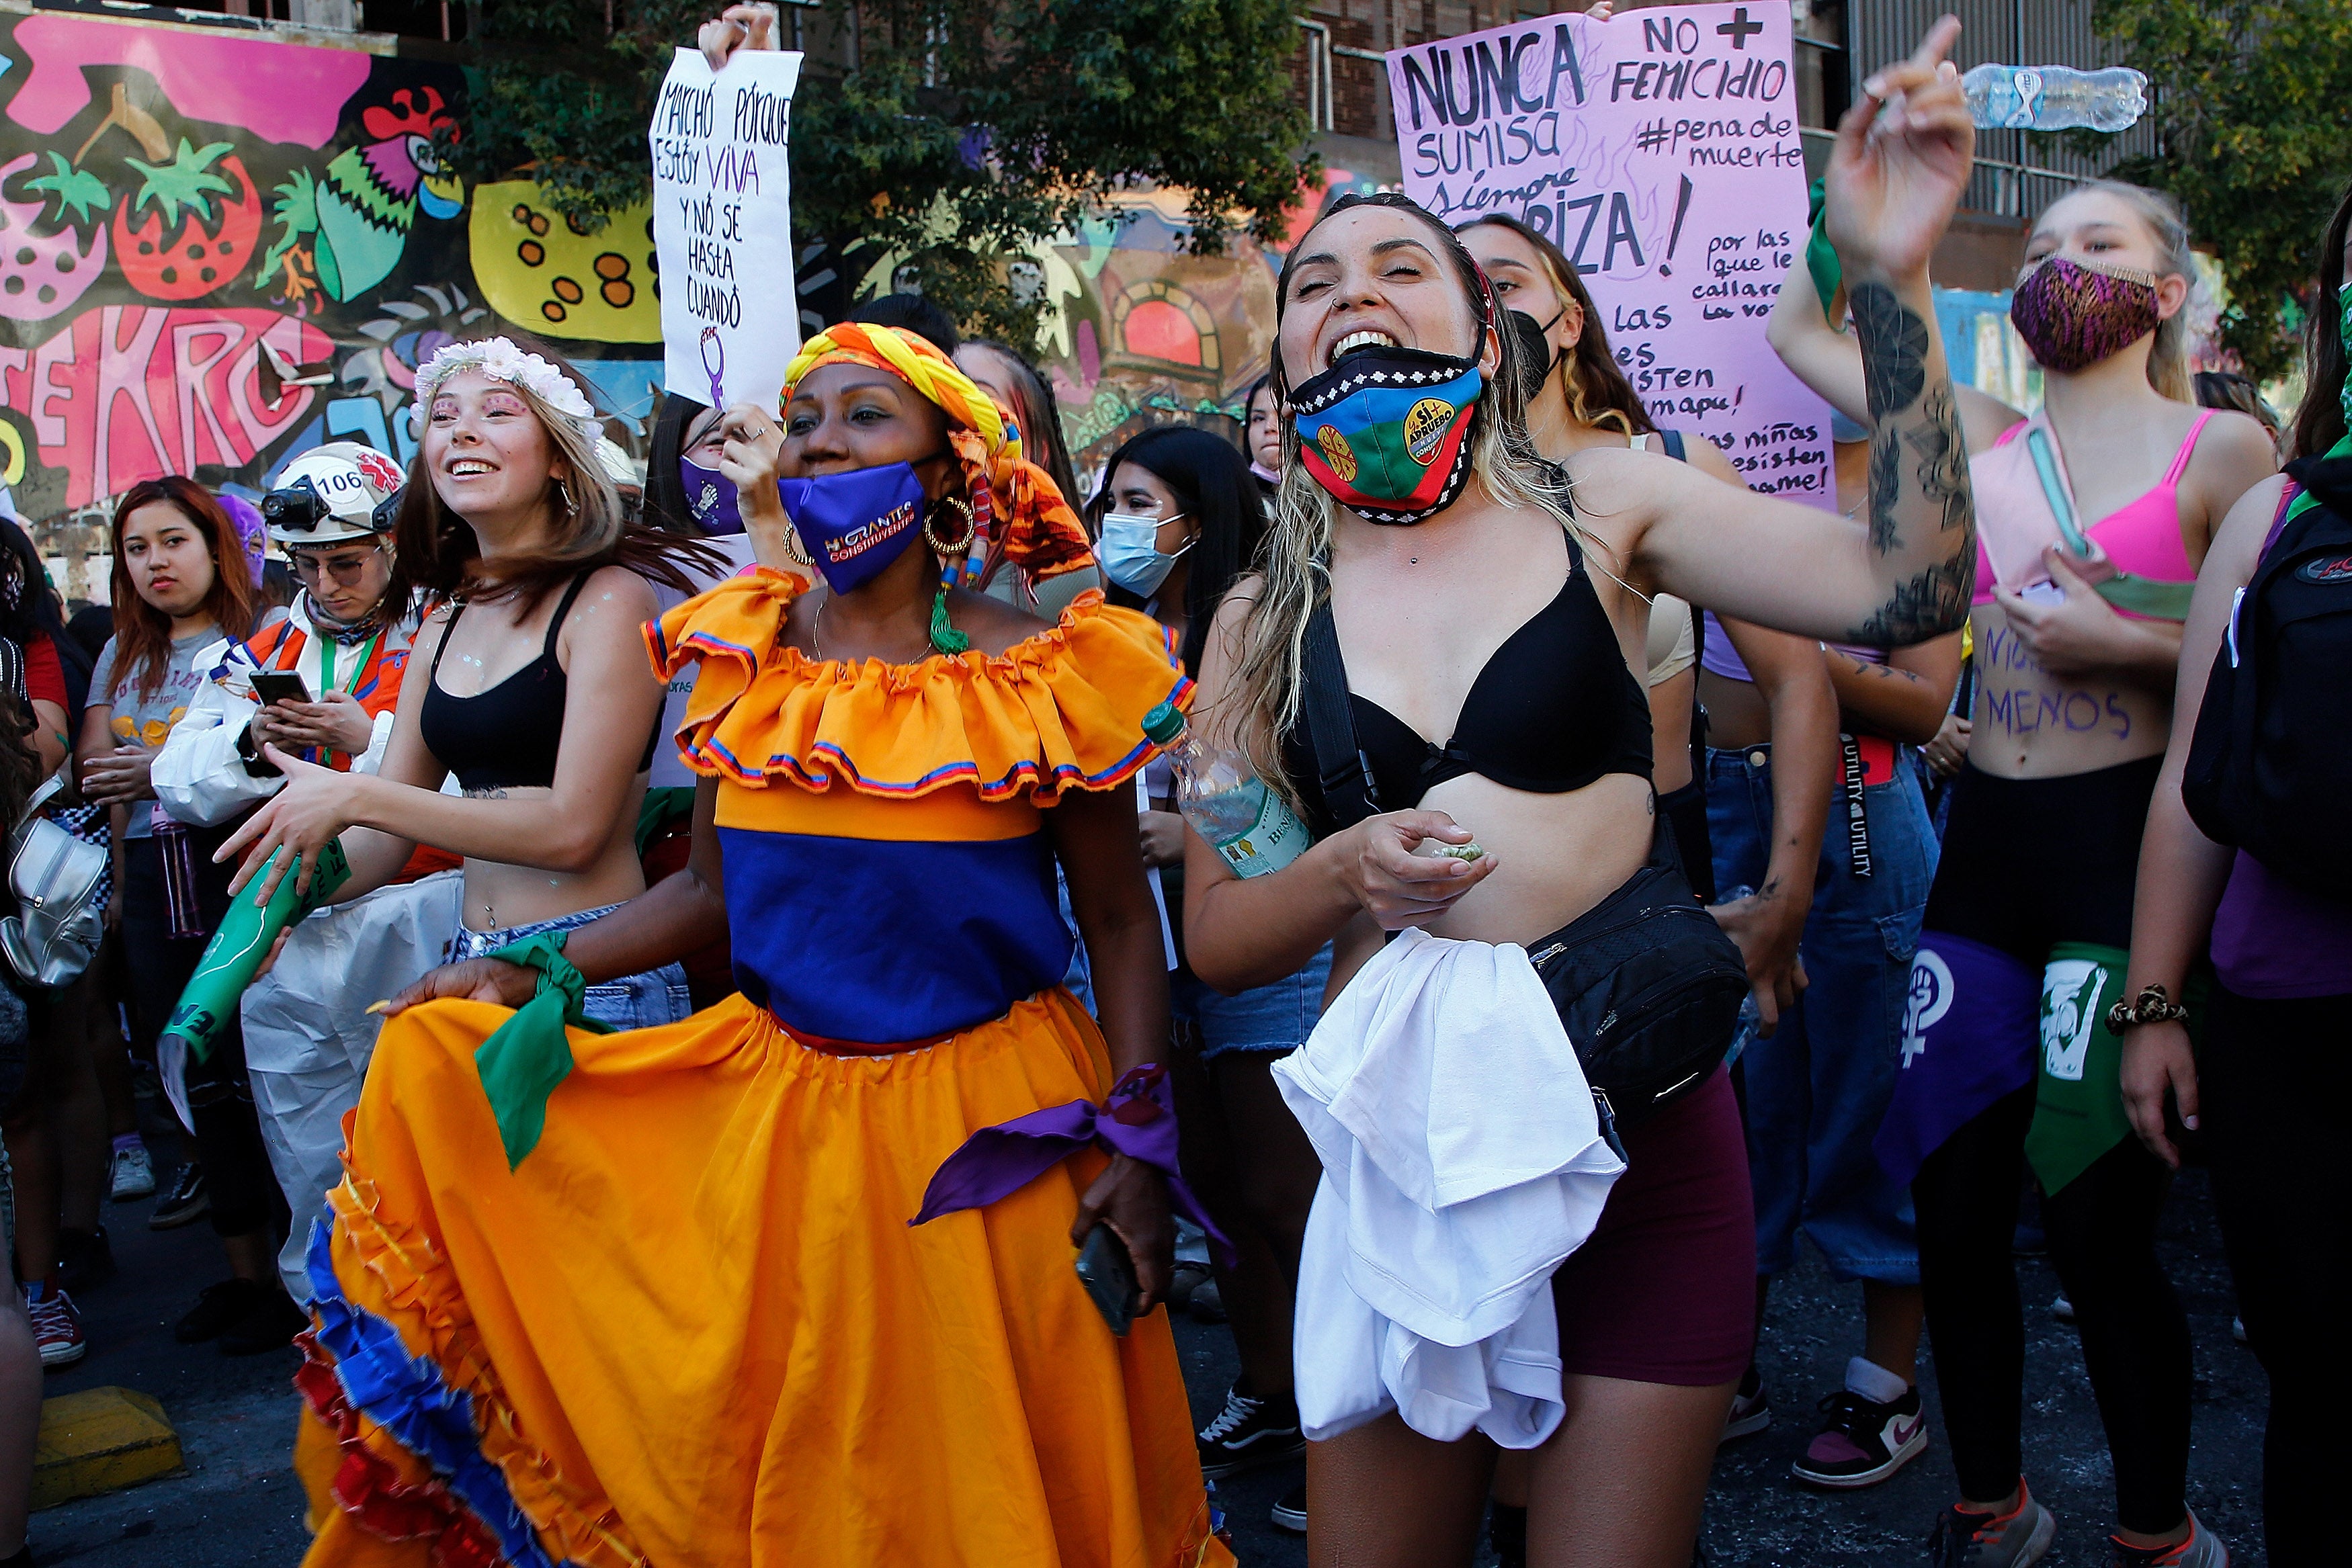 Women take part in a rally in support of legal abortion on International Women's Day in Santiago, Chile, on 8 March